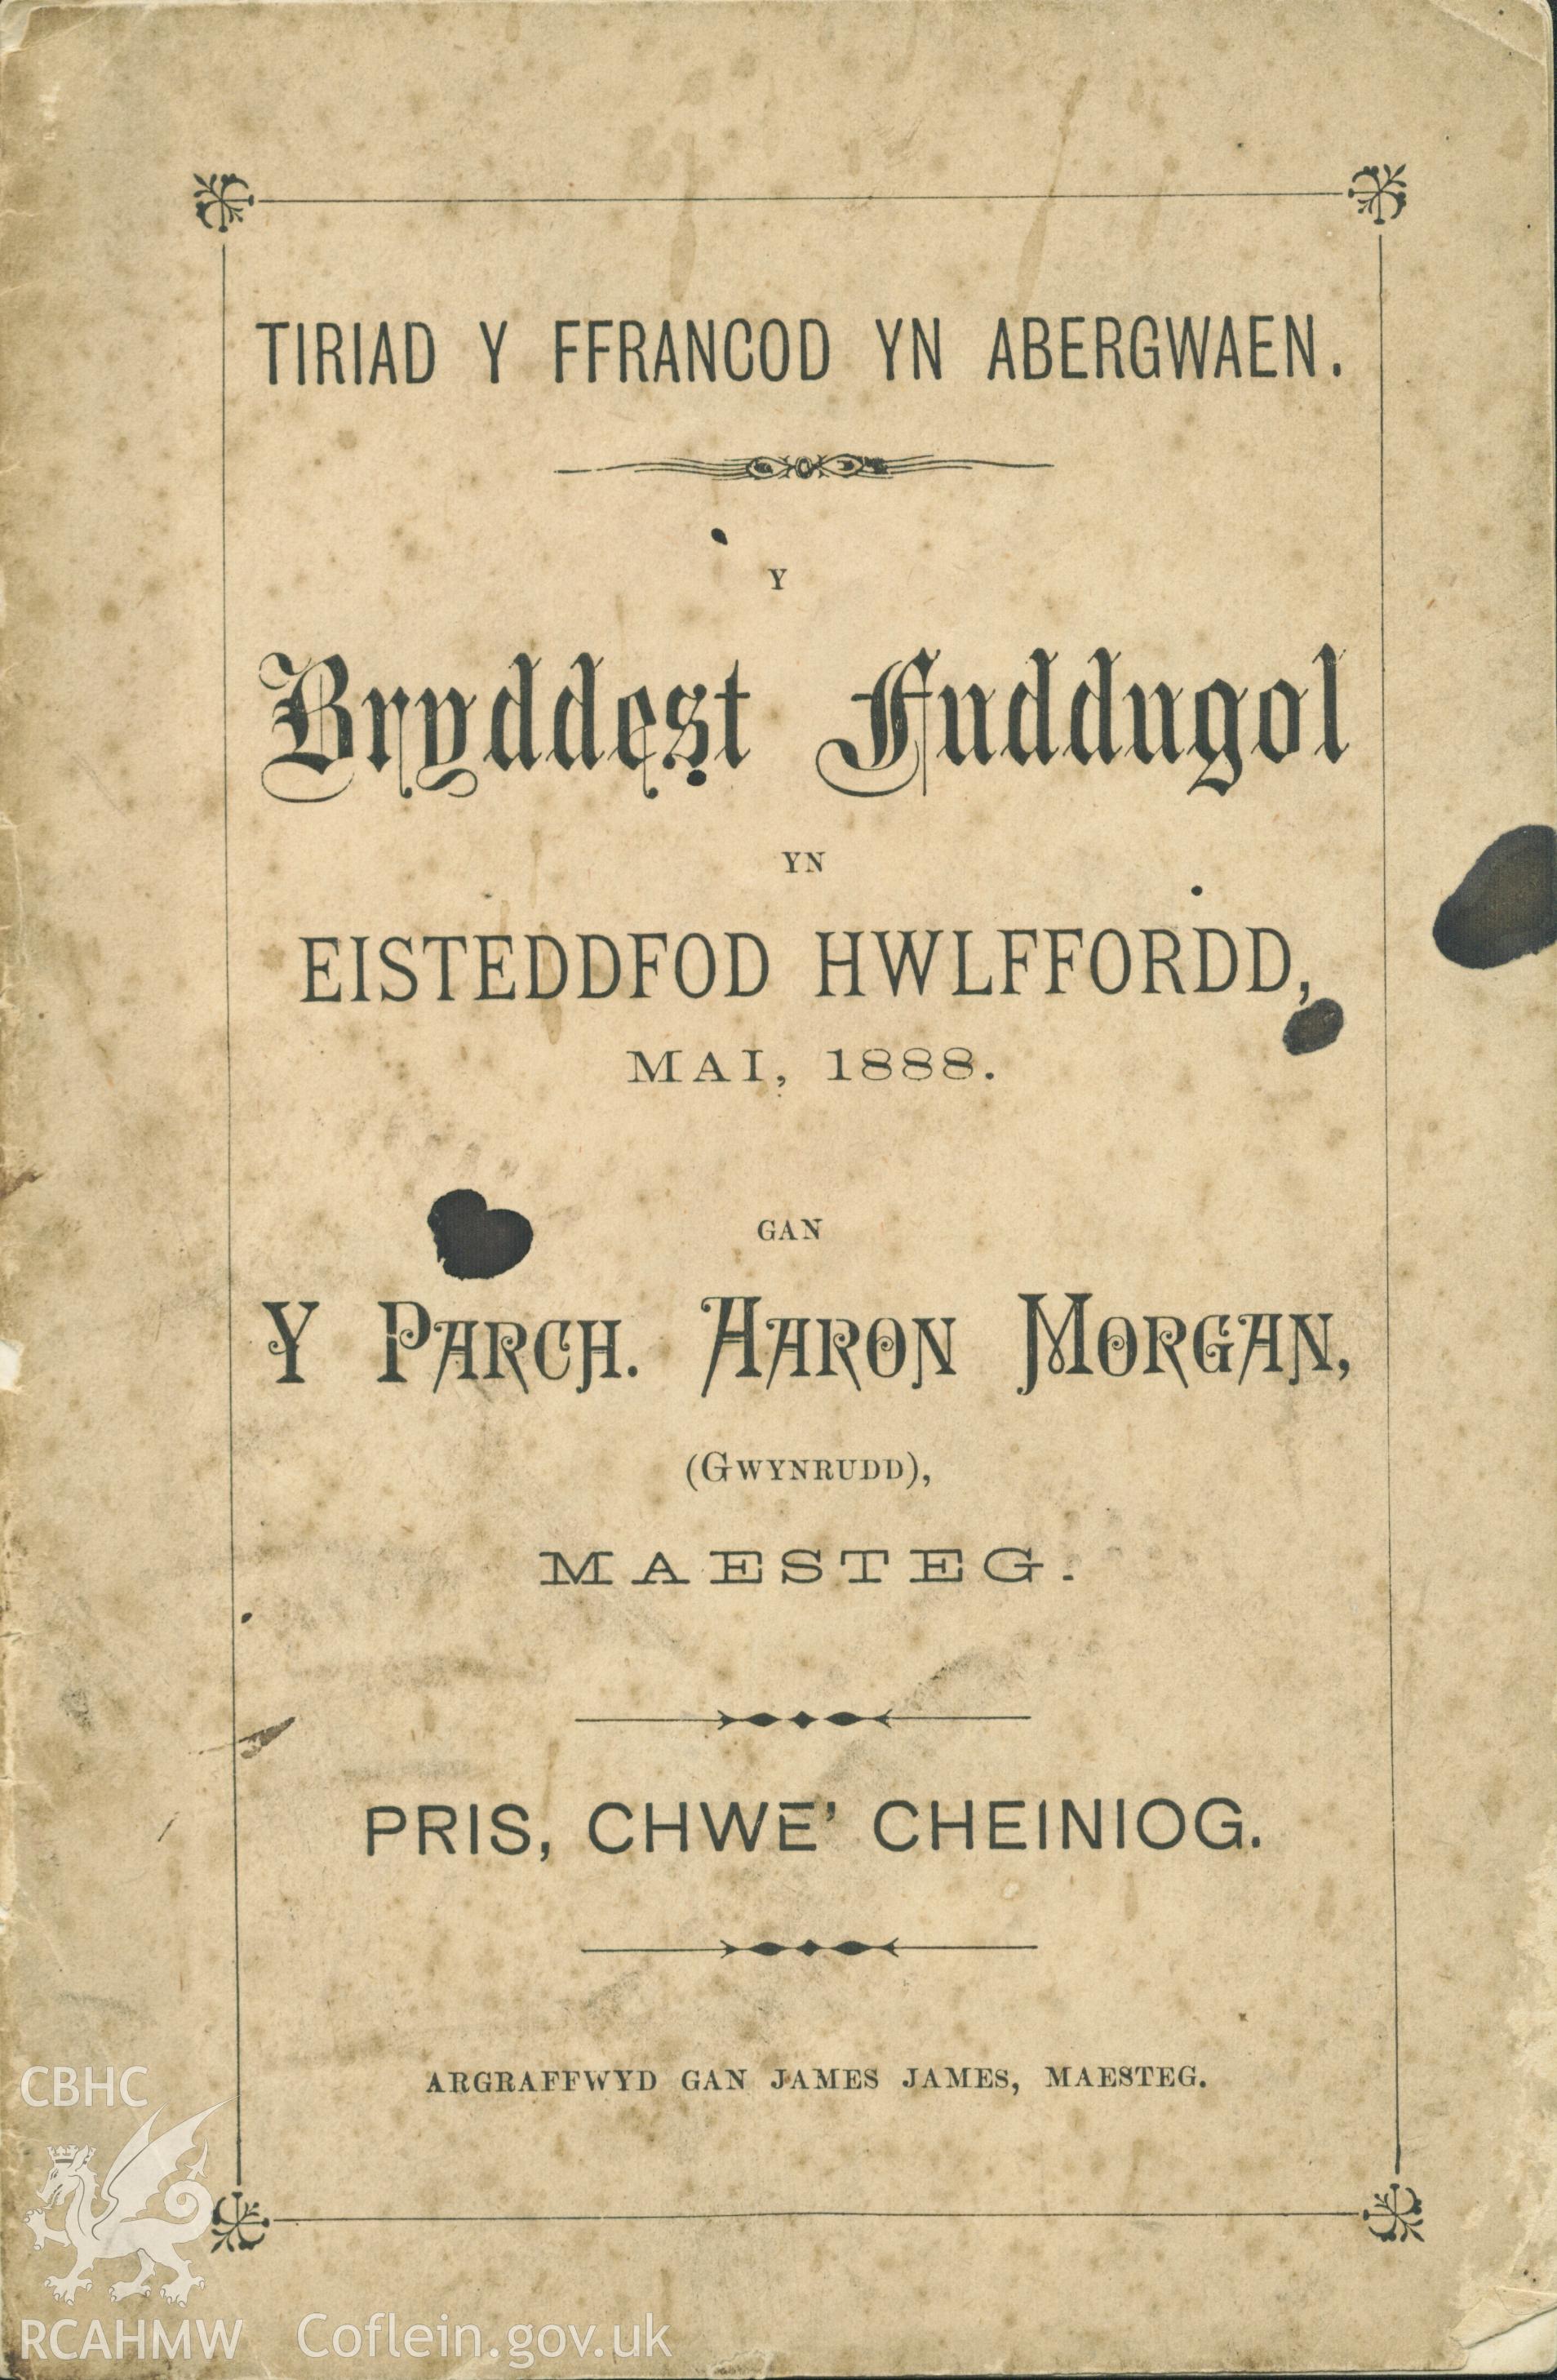 Copy of the programme for the induction of Rev Richard Edwards, May 1888. Donated to the RCAHMW by Cyril Philips as part of the Digital Dissent Project.